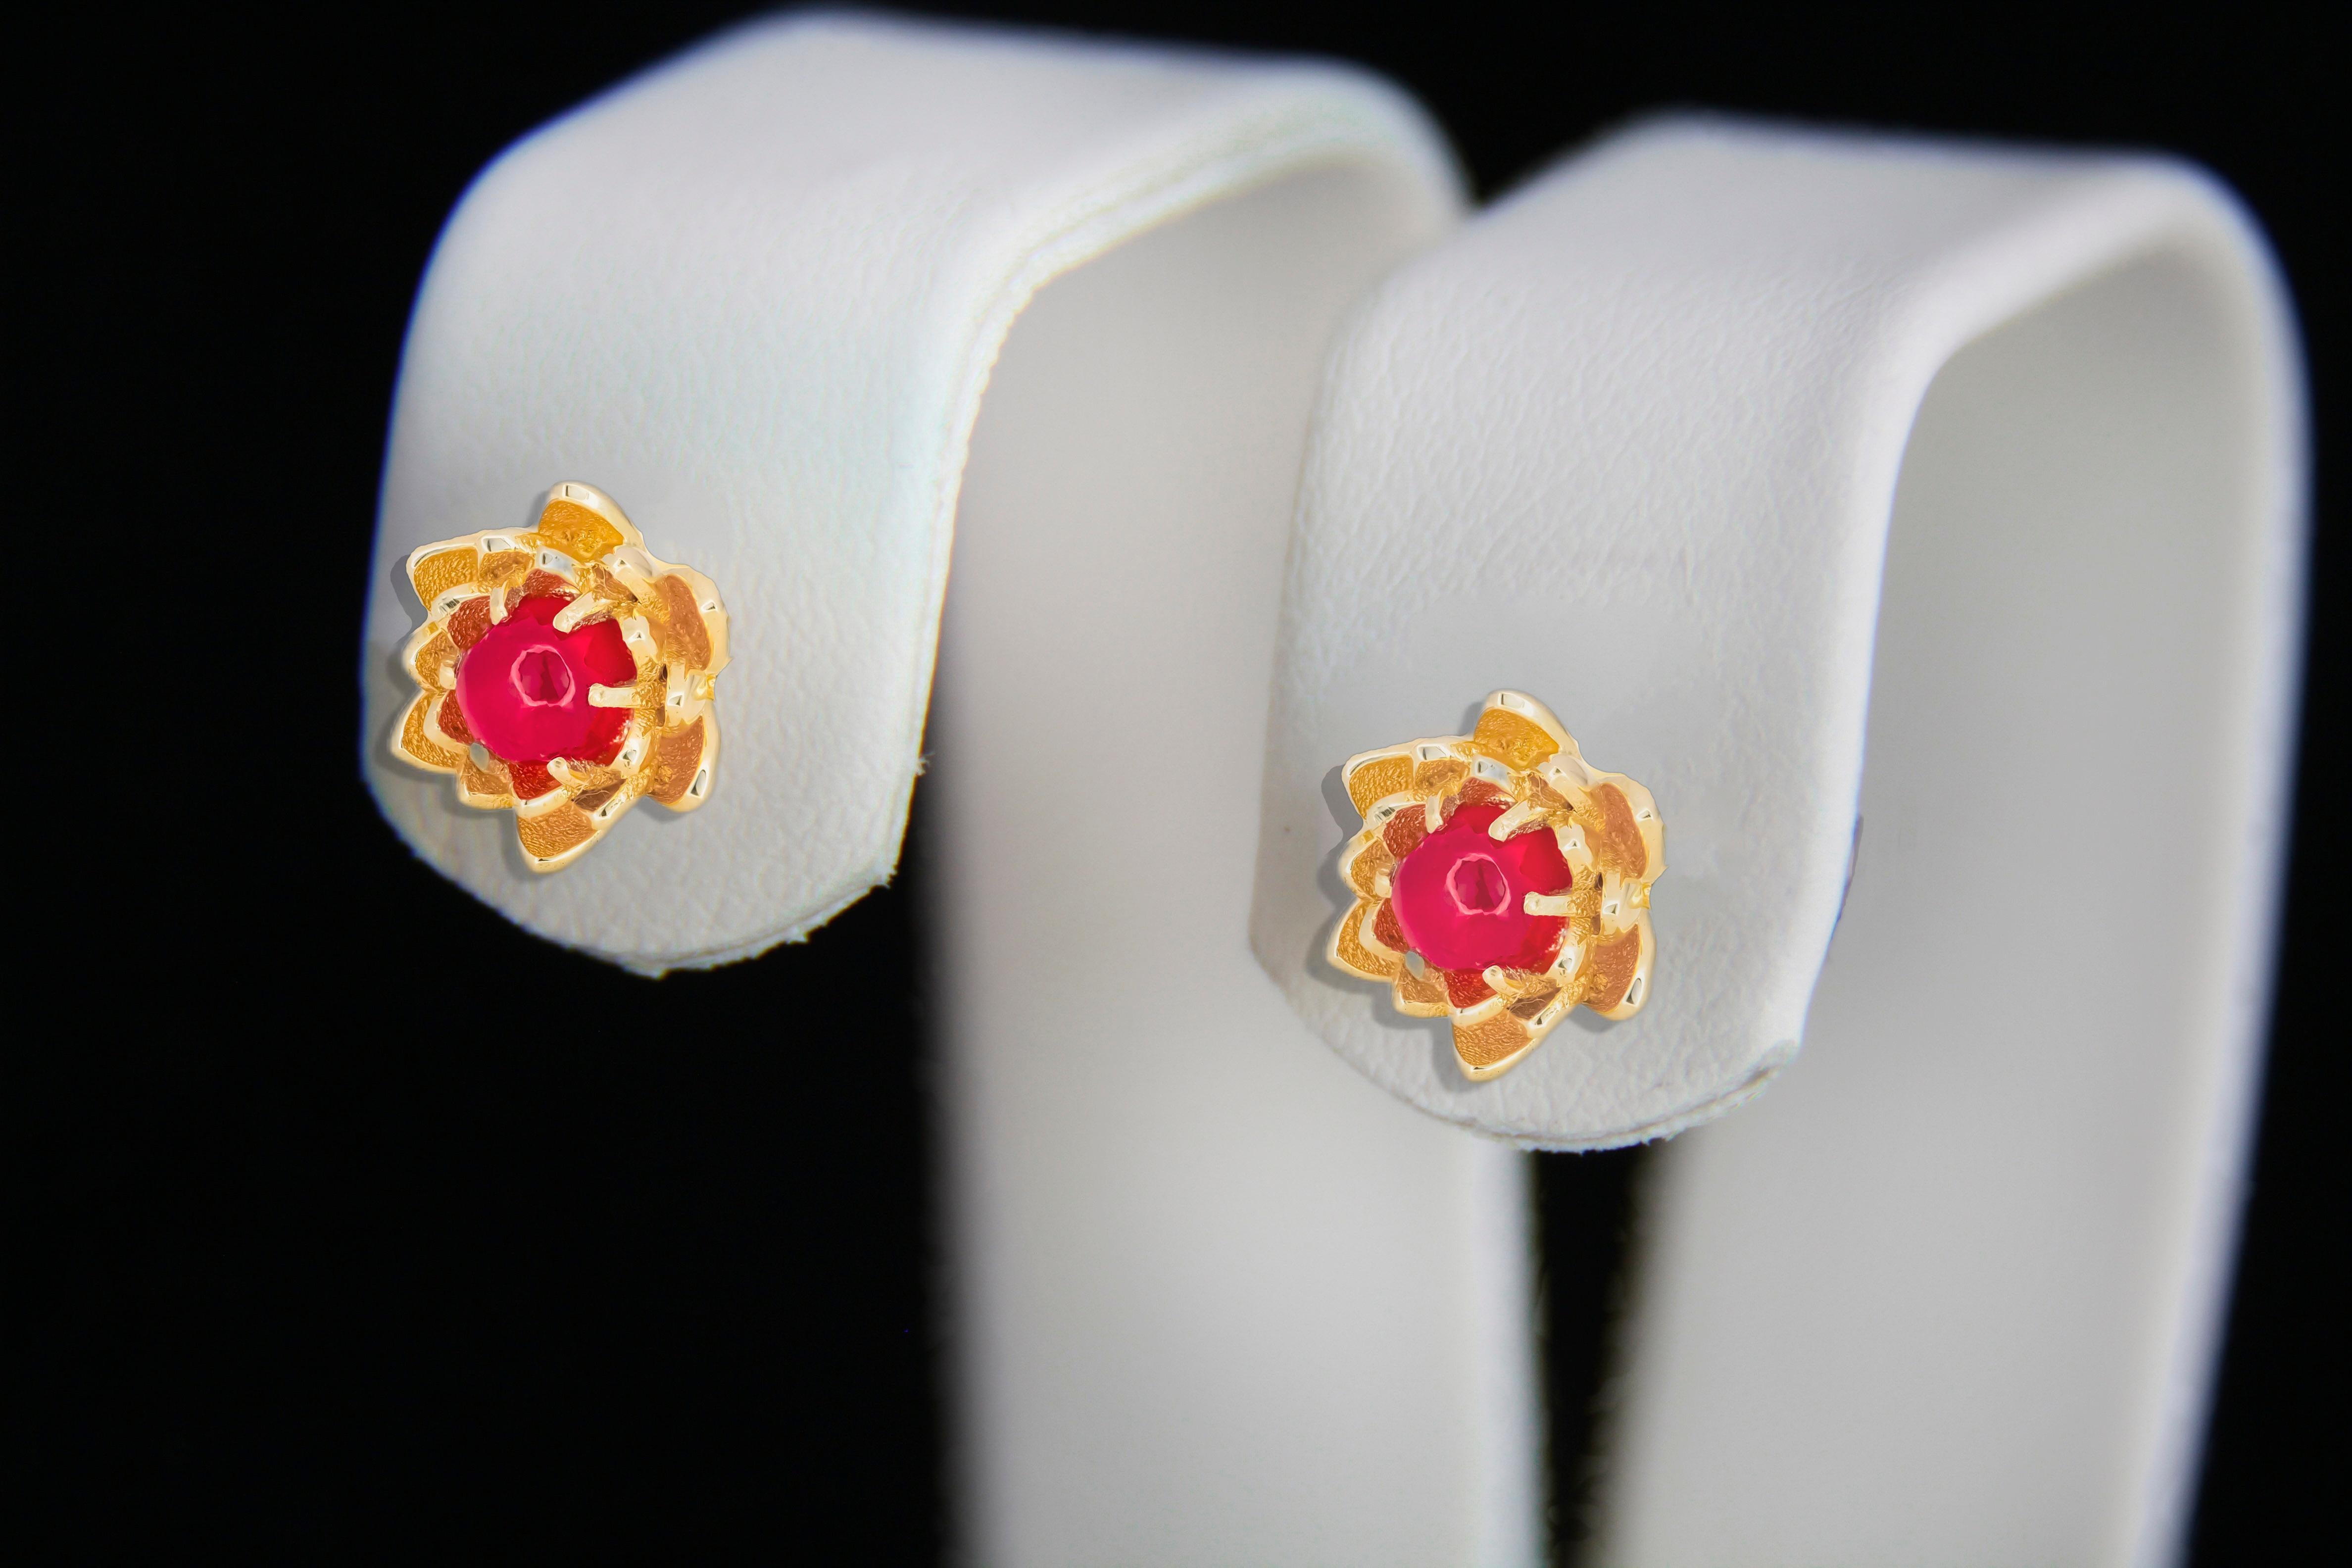 Lotus earrings studs with rubies in 14k gold. Ruby cabochon earrings. Ruby Gold Earrings. Flower gold earrings. Delicate ruby earrings.

Metal: 14k solid gold
Total weigh: 2.2 gr (depends from ring size)

Earrings:
Central stone: Rubies
Weight: 0.40